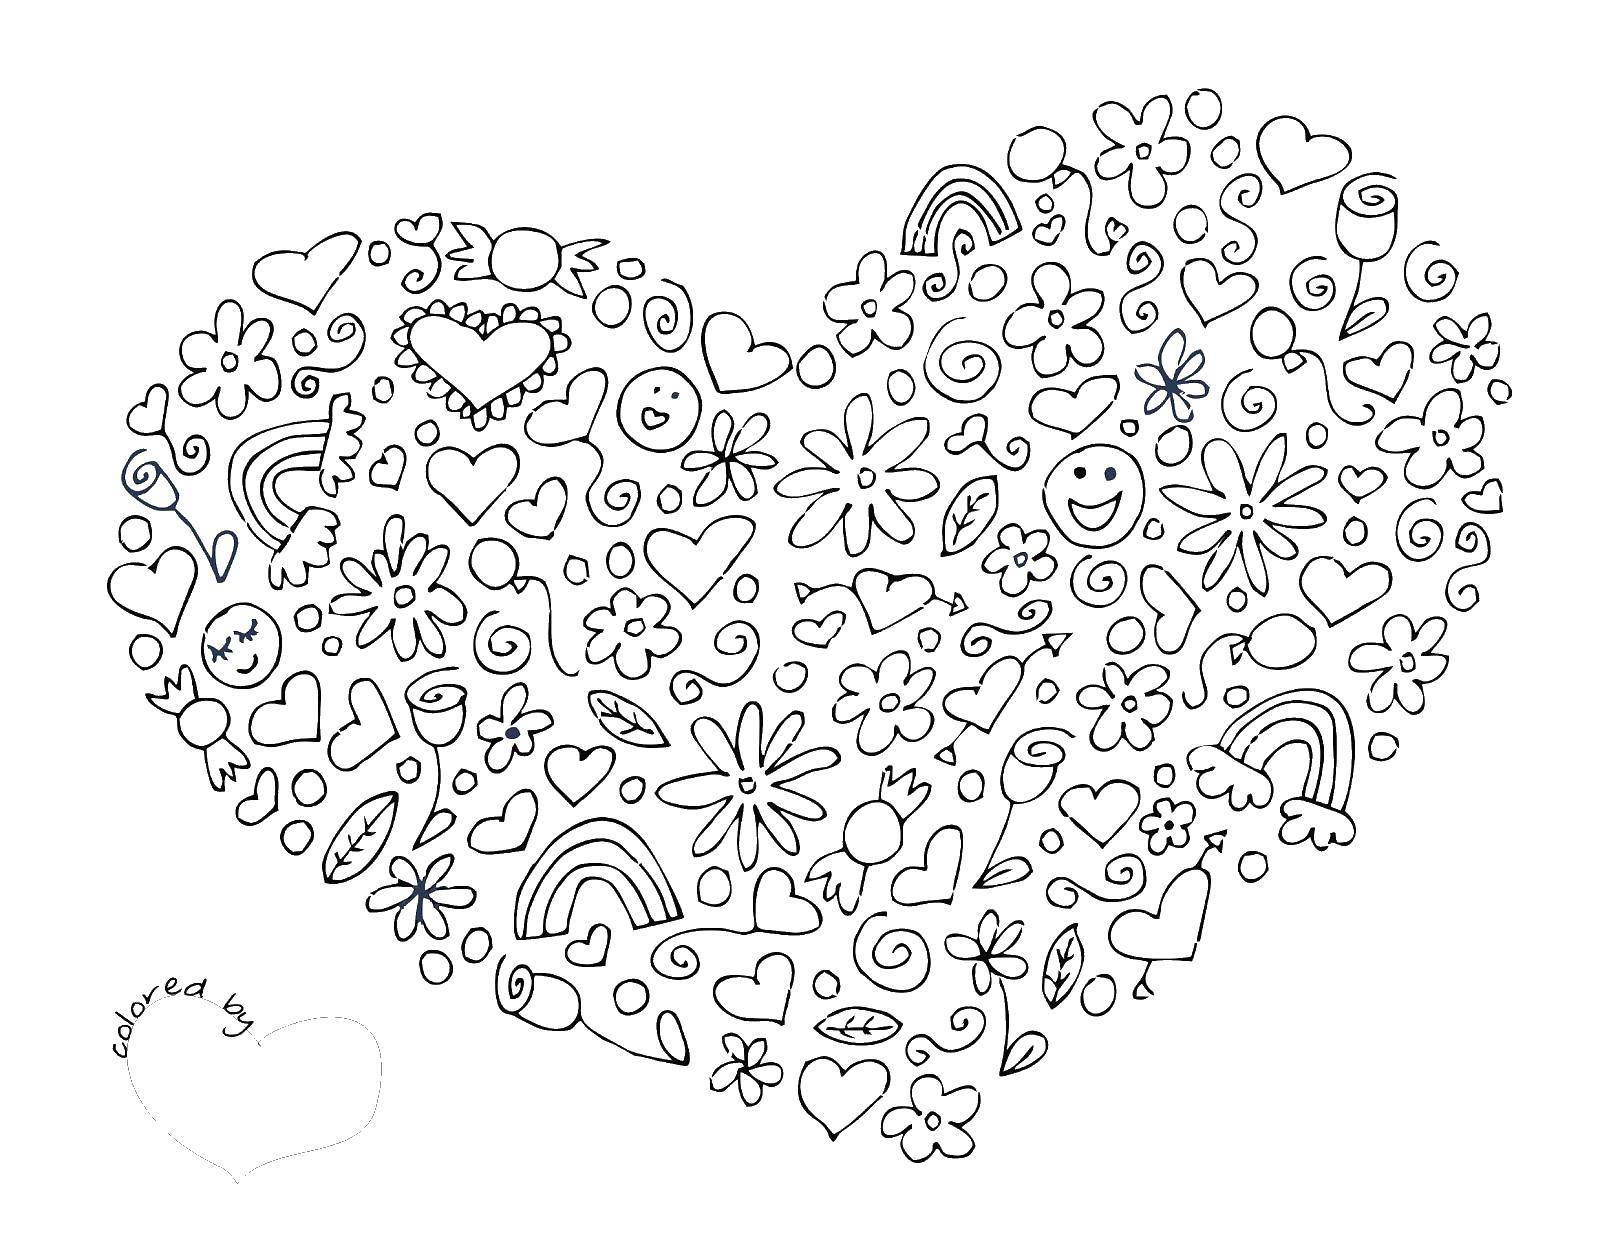 Coloring The heart of the drawings.. Category With patterns. Tags:  heart, patterns.